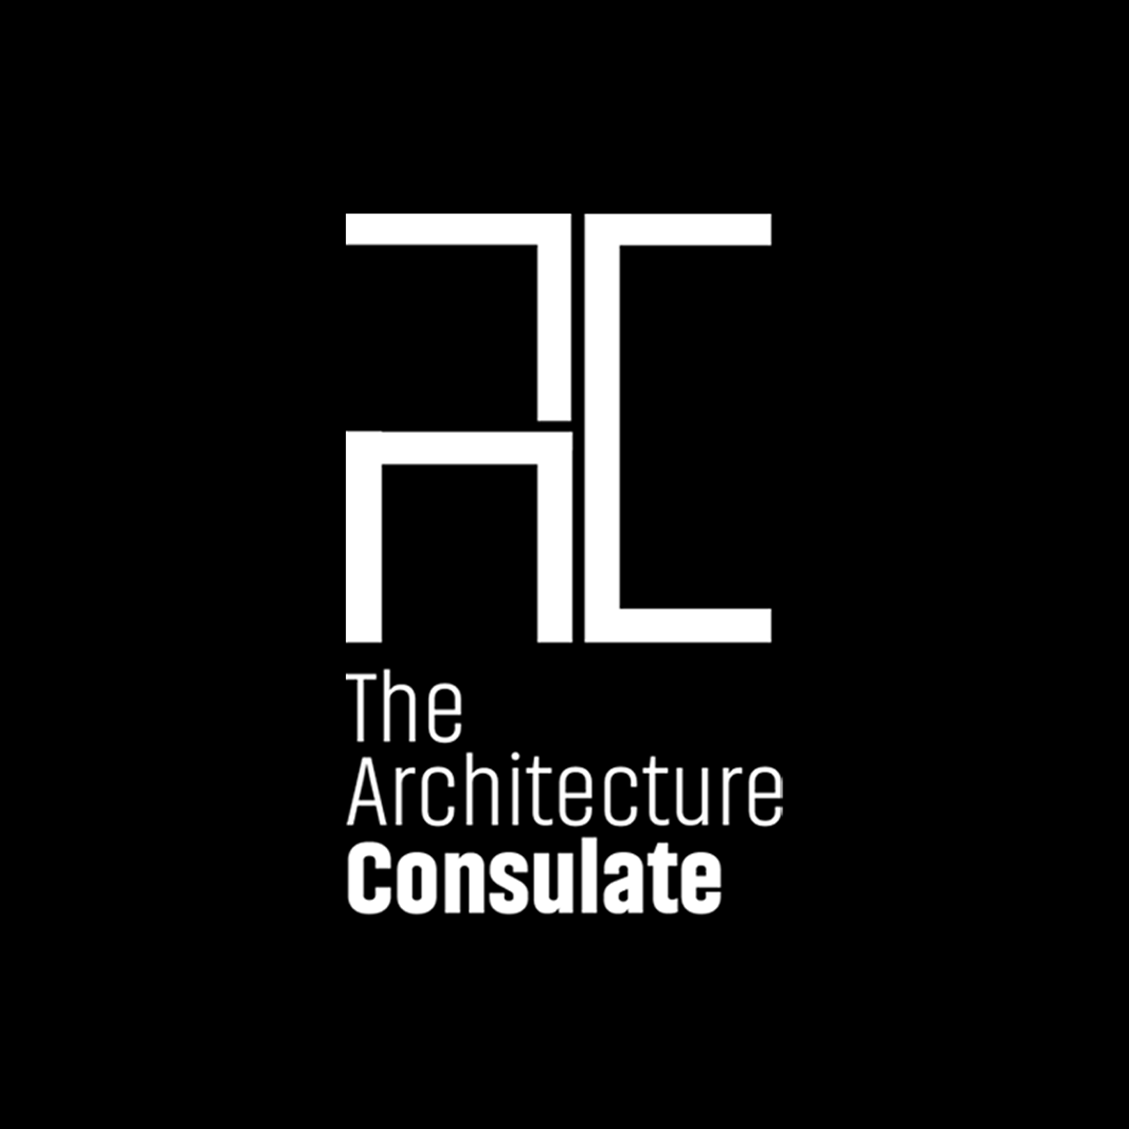 The Architecture Consulate|Accounting Services|Professional Services